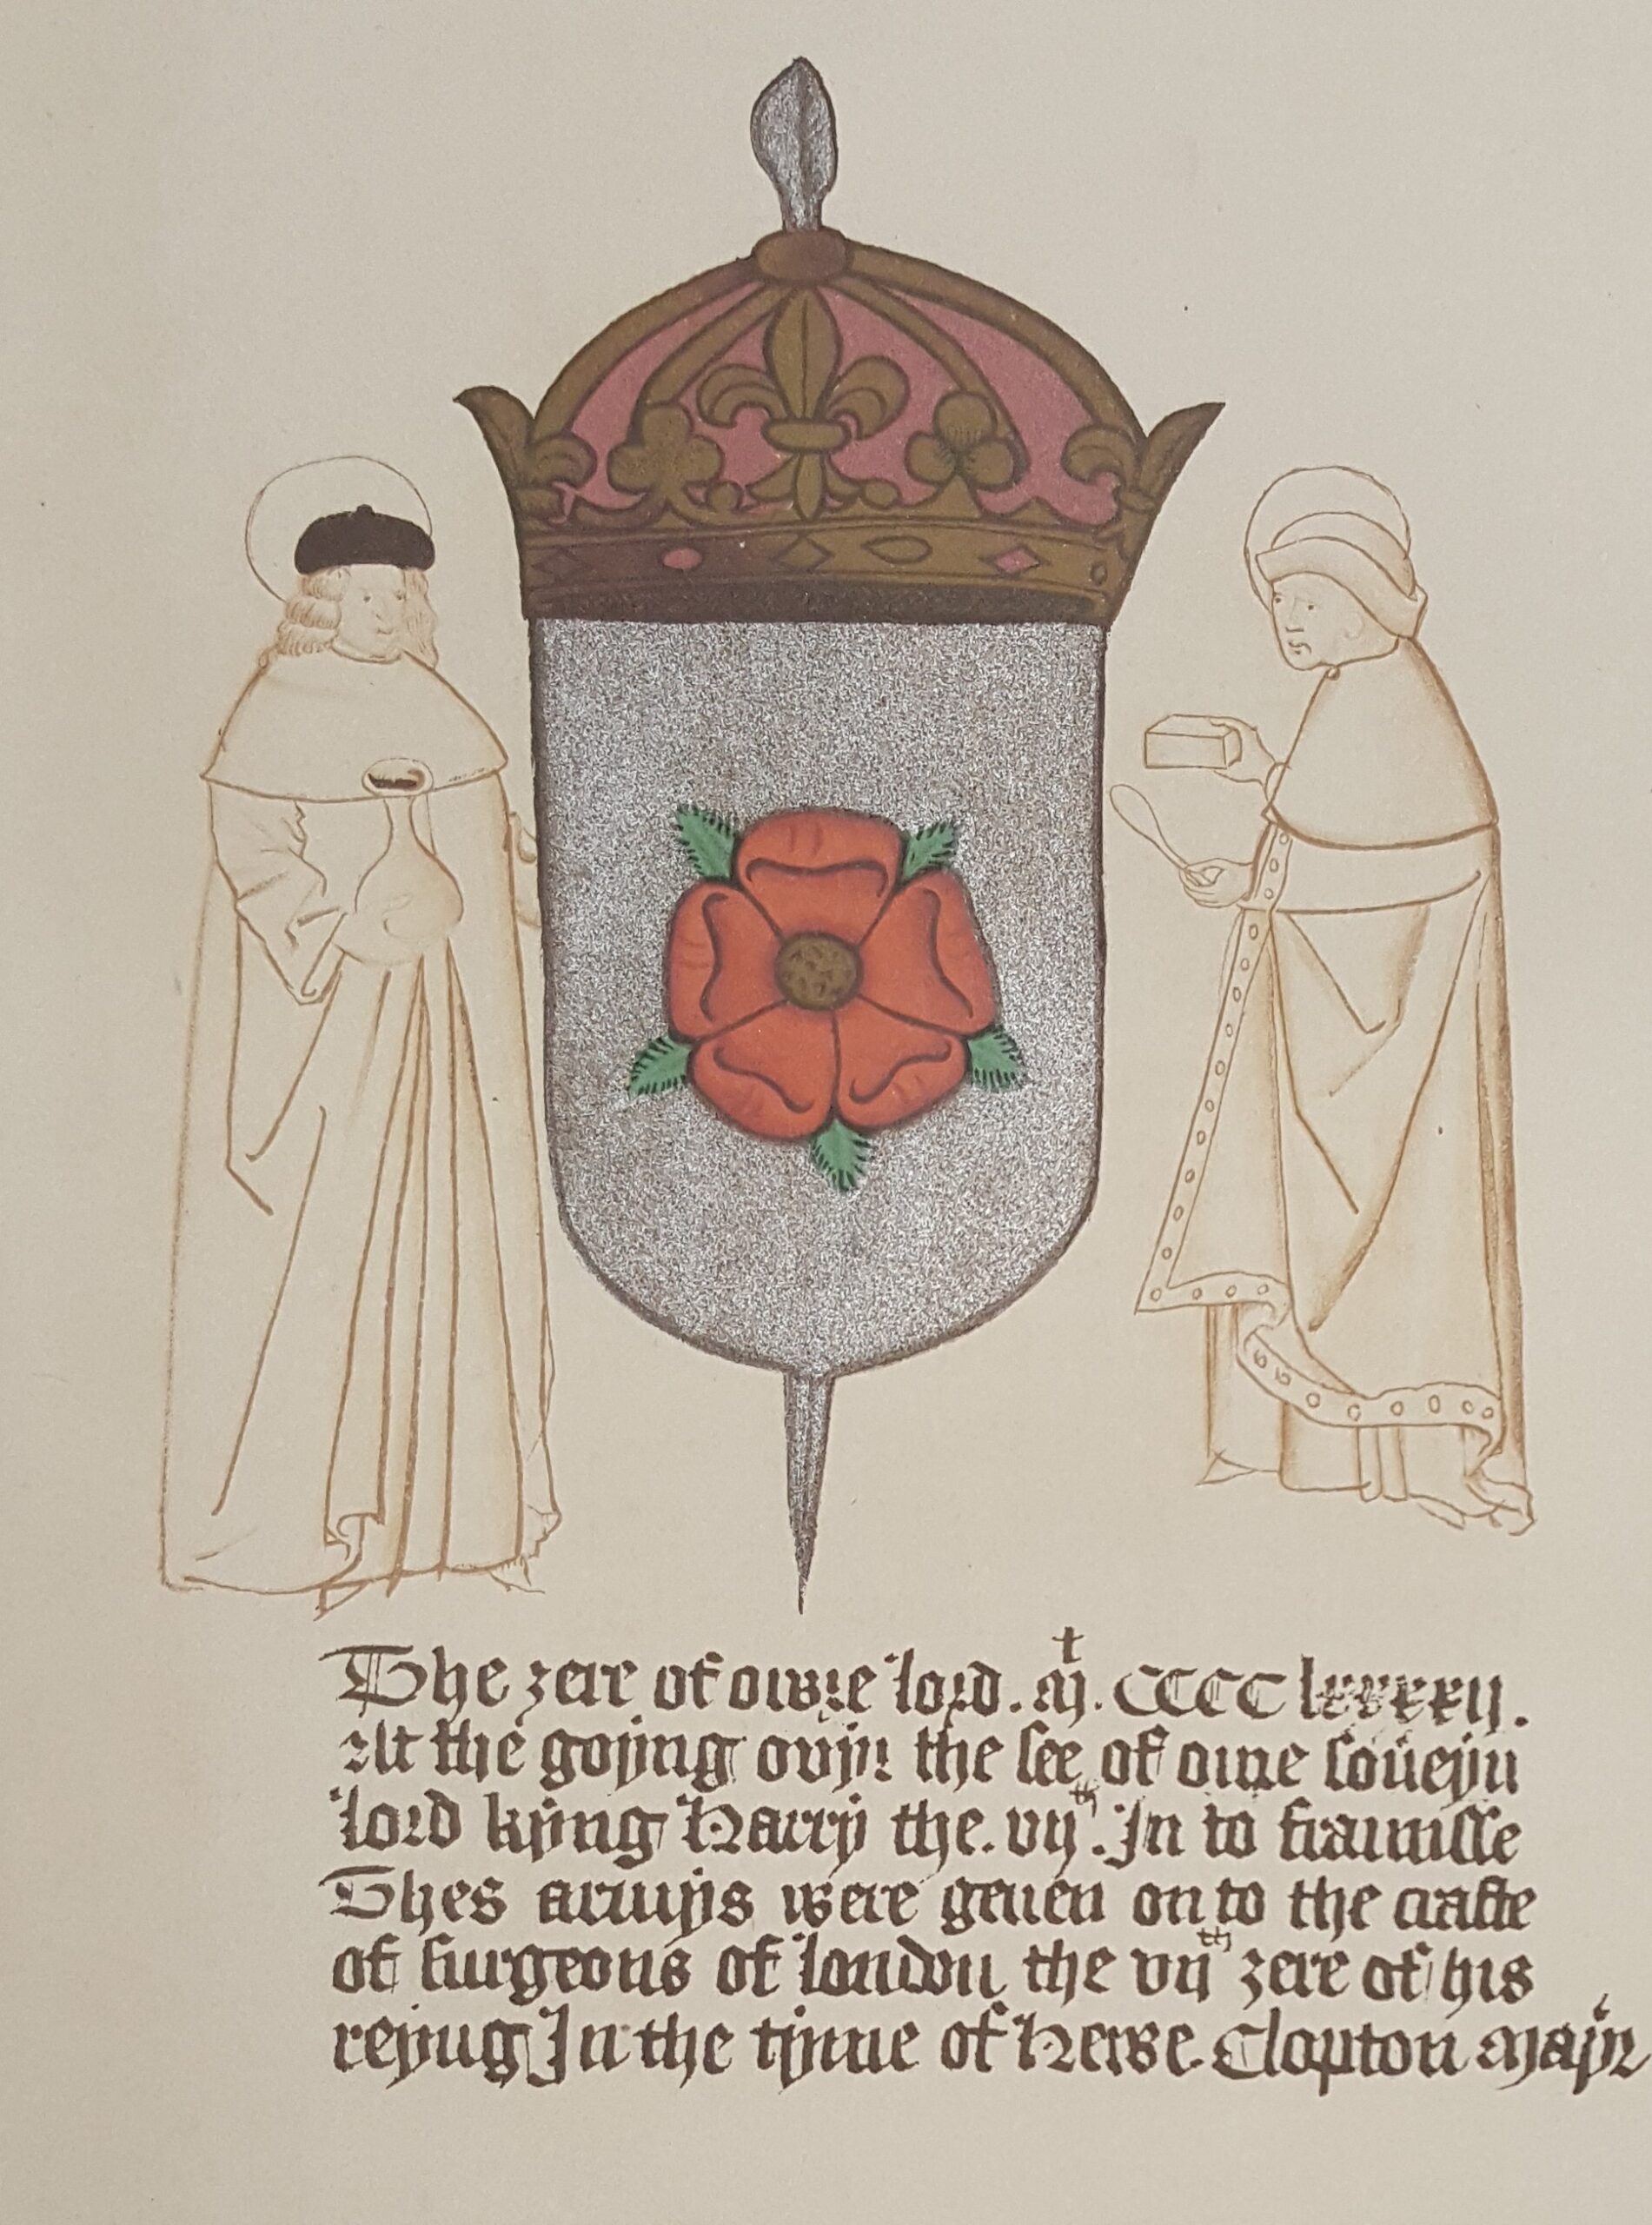 Cosmas and Damian with the 1492 cognizance of the Guild of Surgeons